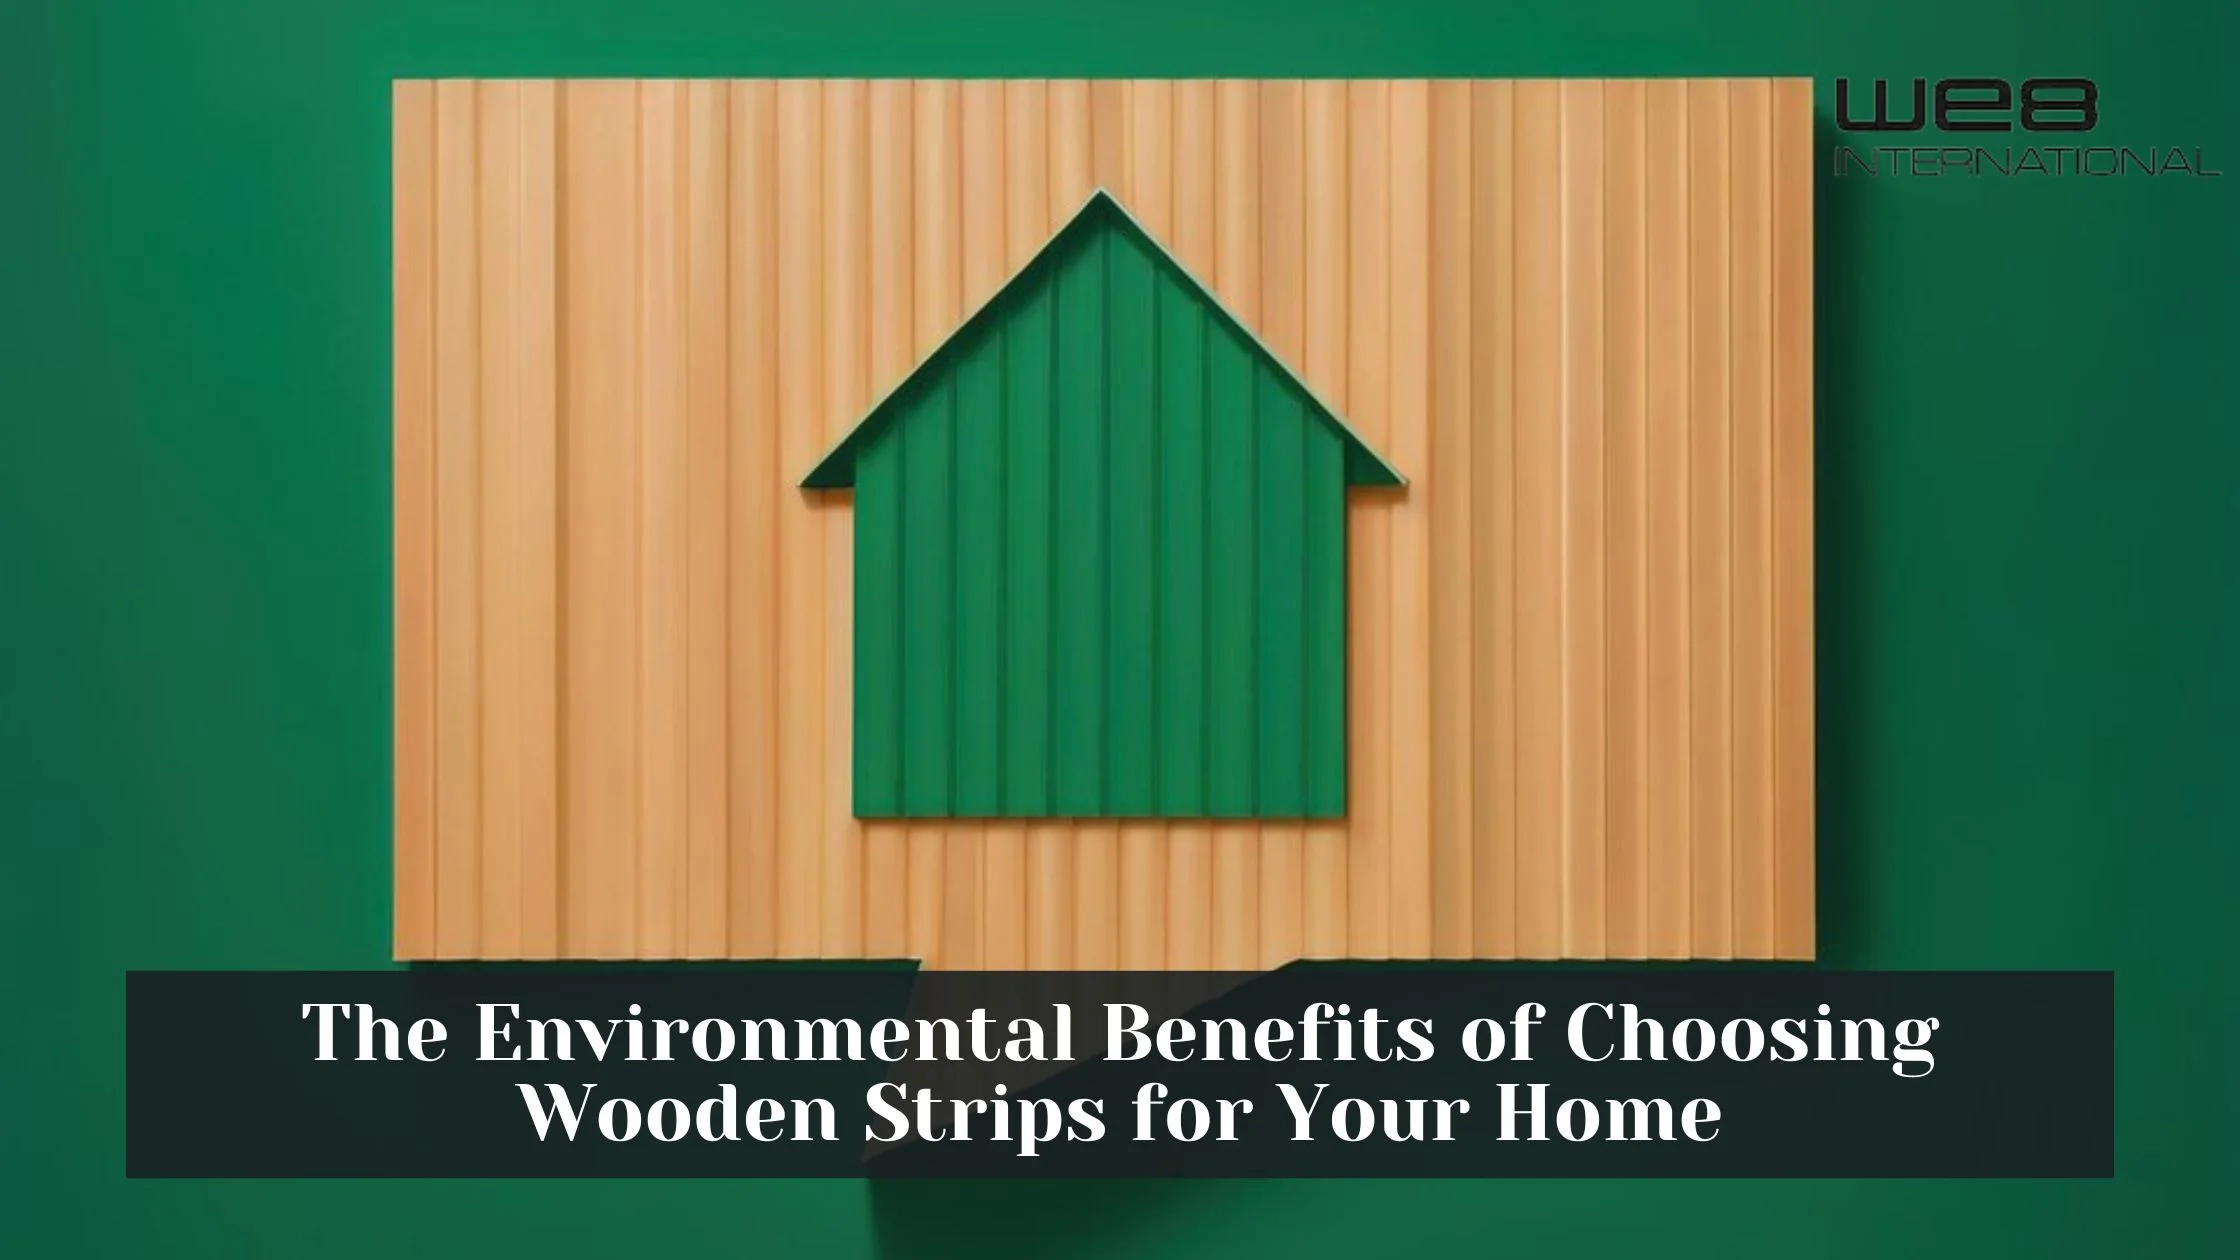 The Environmental Benefits of Choosing Wooden Strips for Your Home